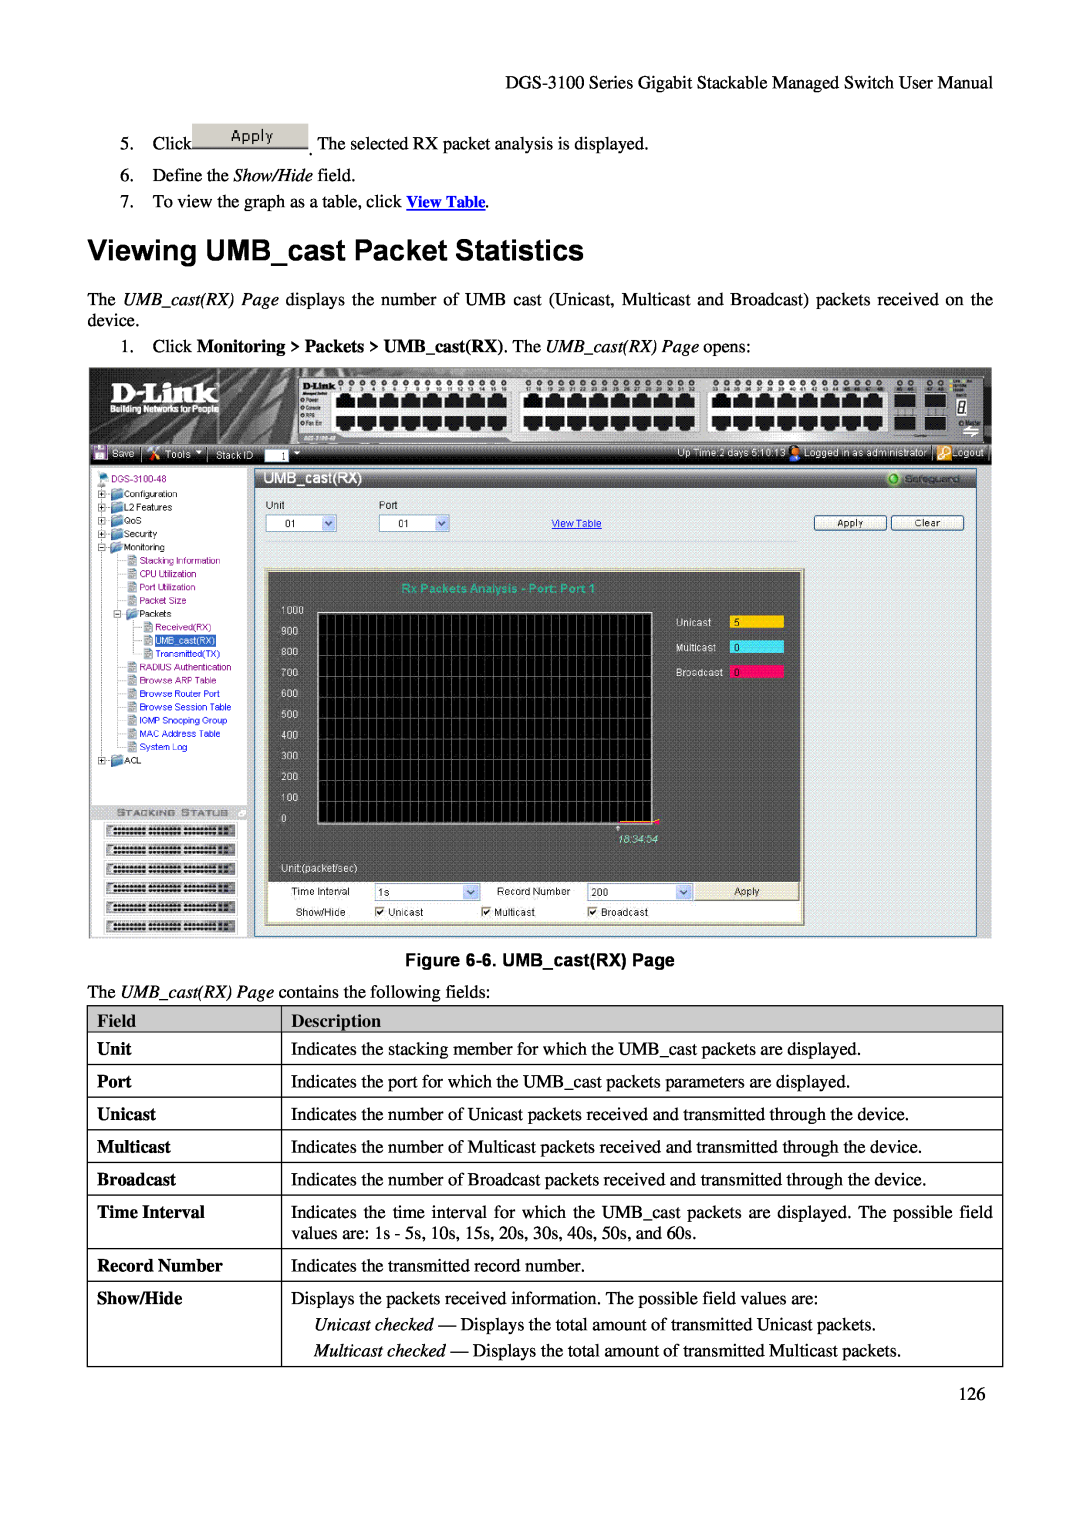 D-Link DGS-3100 user manual Viewing UMBcast Packet Statistics, Click Monitoring Packets UMBcastRX. The UMBcastRX Page opens 